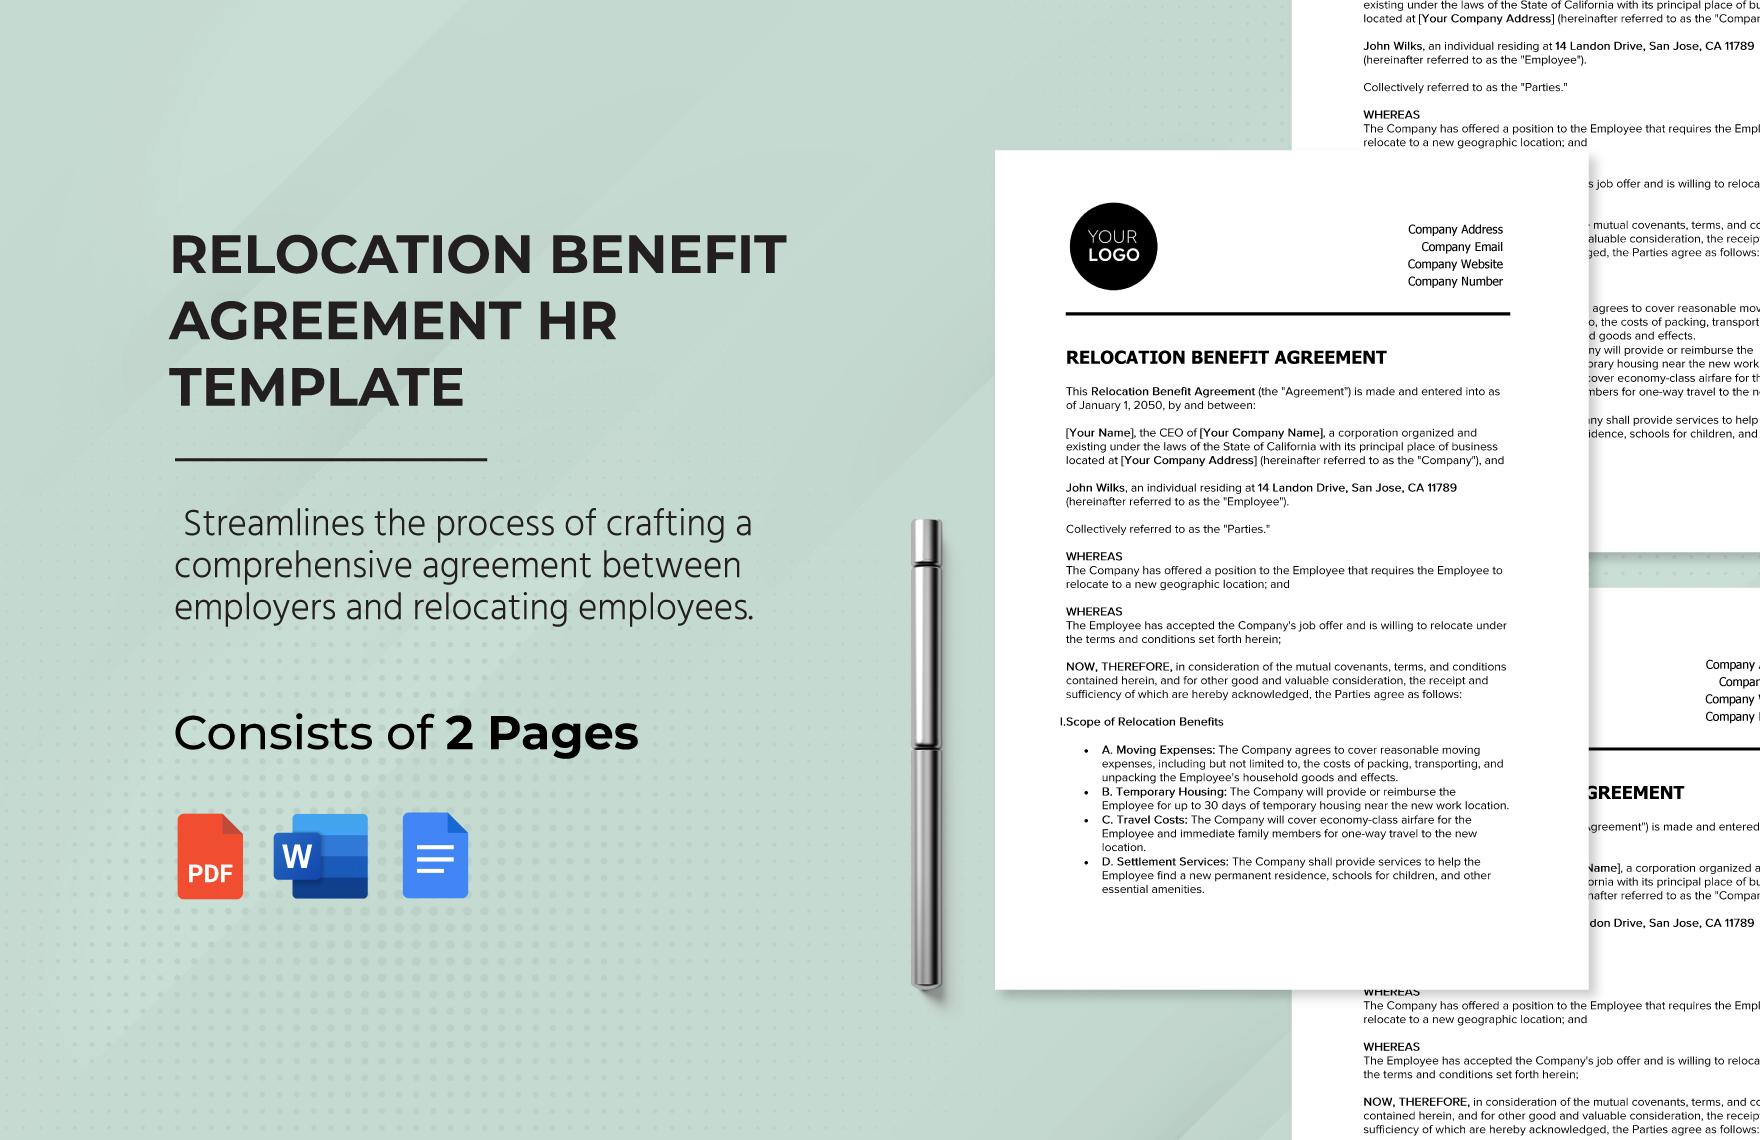 Relocation Benefit Agreement HR Template